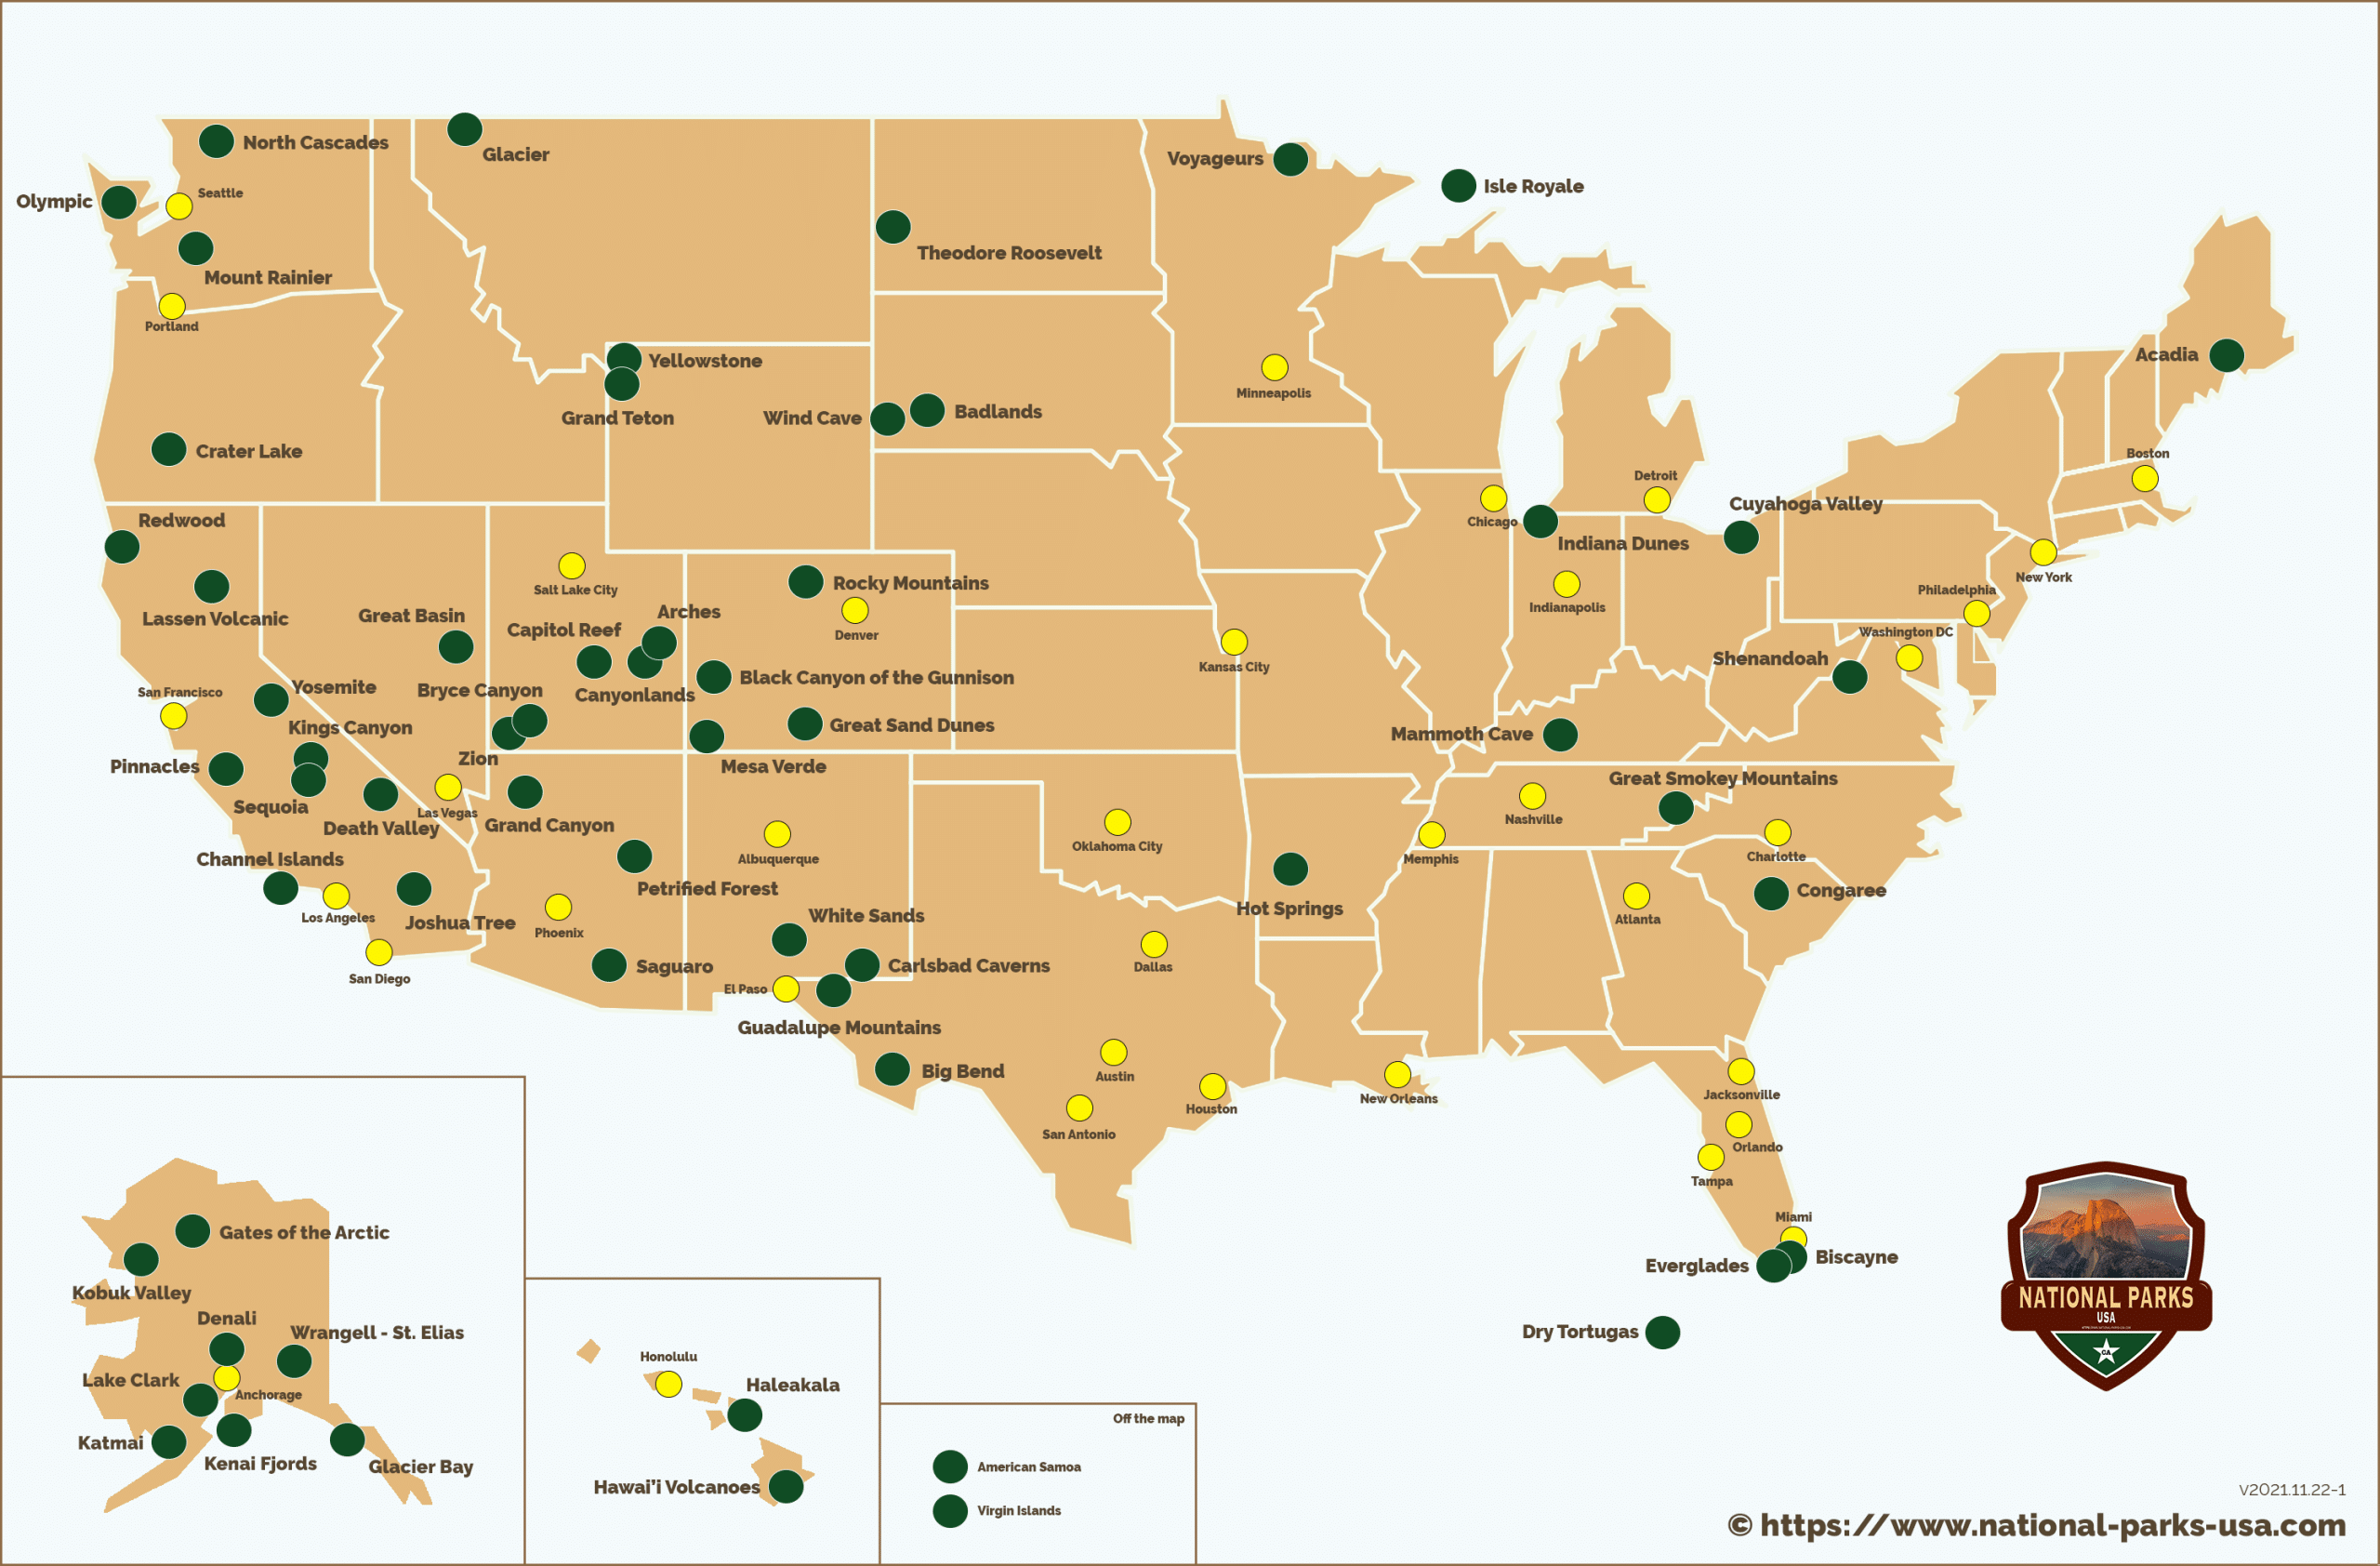 national-parks-map-here-are-the-national-parks-in-the-usa